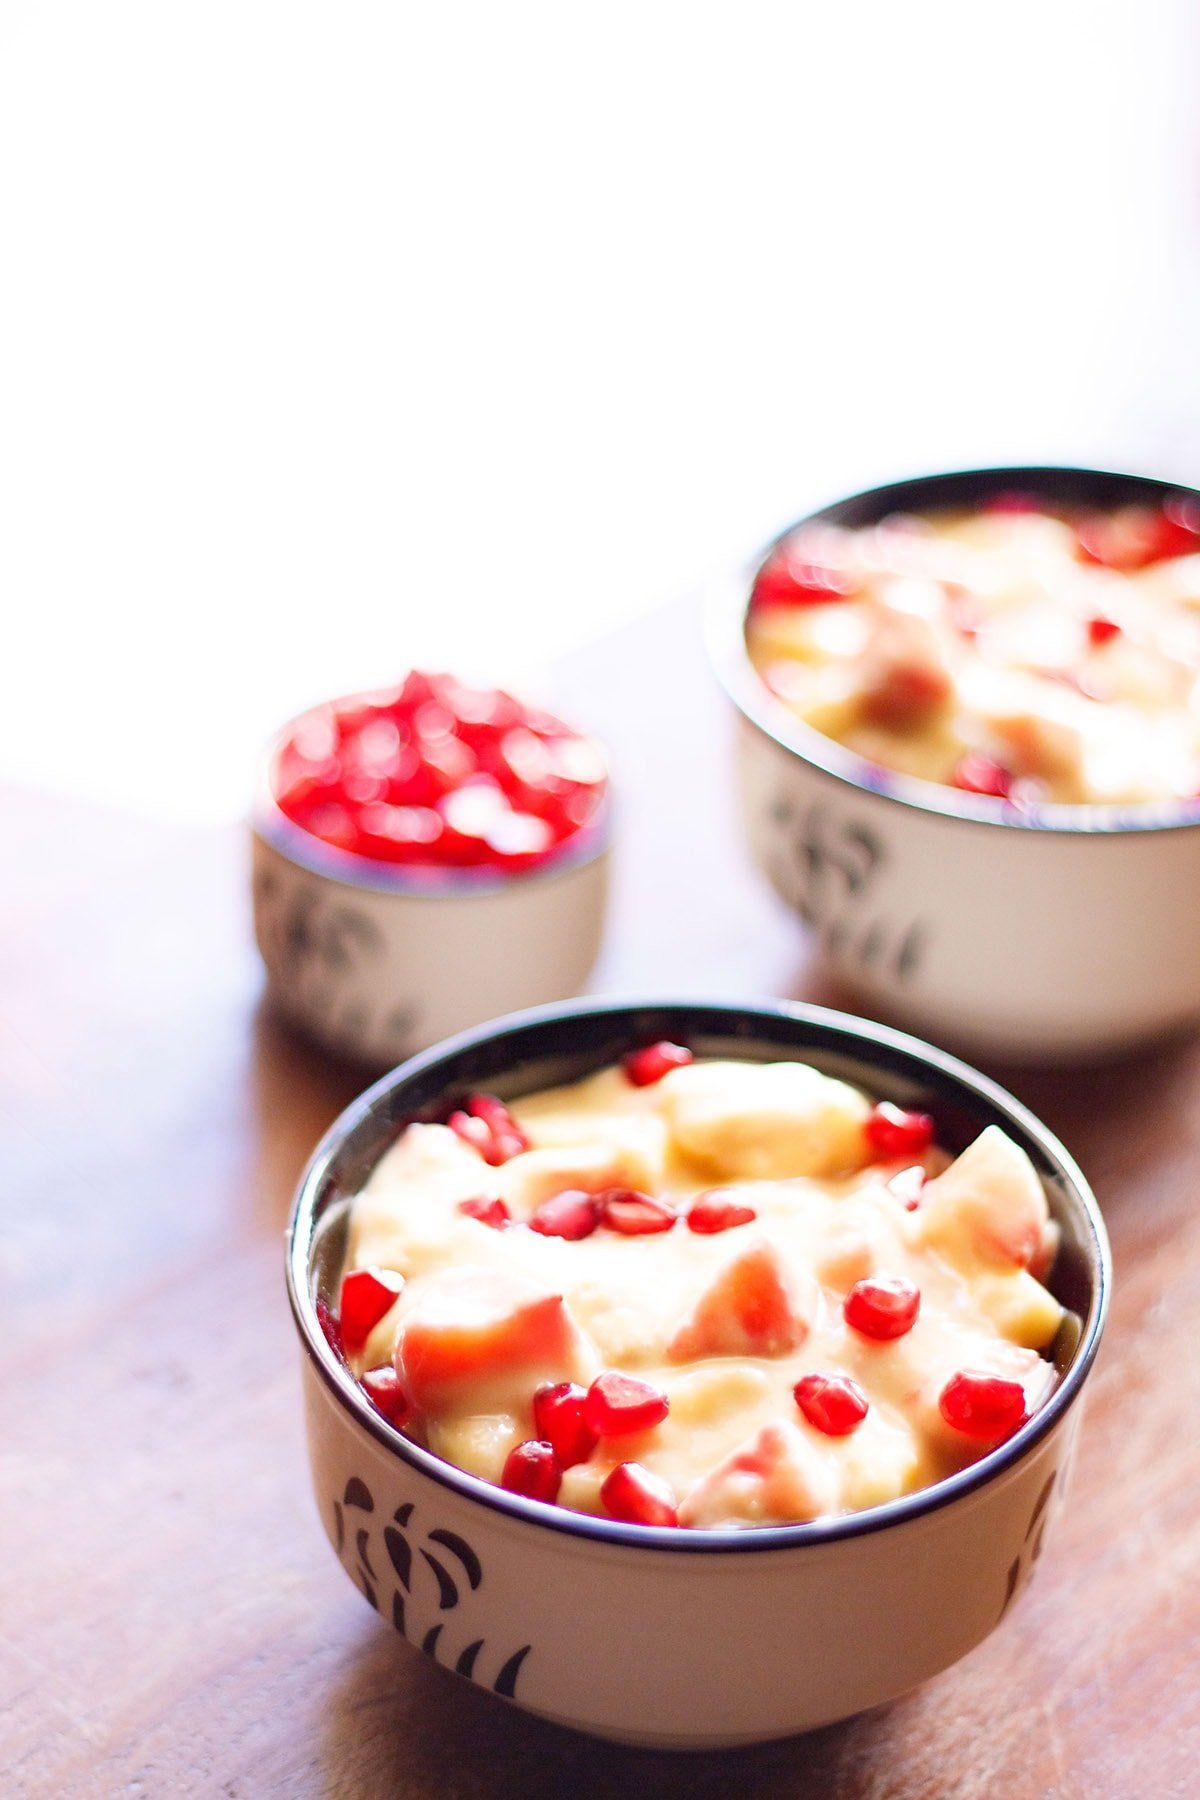 two black and white bowls filled with fruit custard and garnished with pomegranate arils